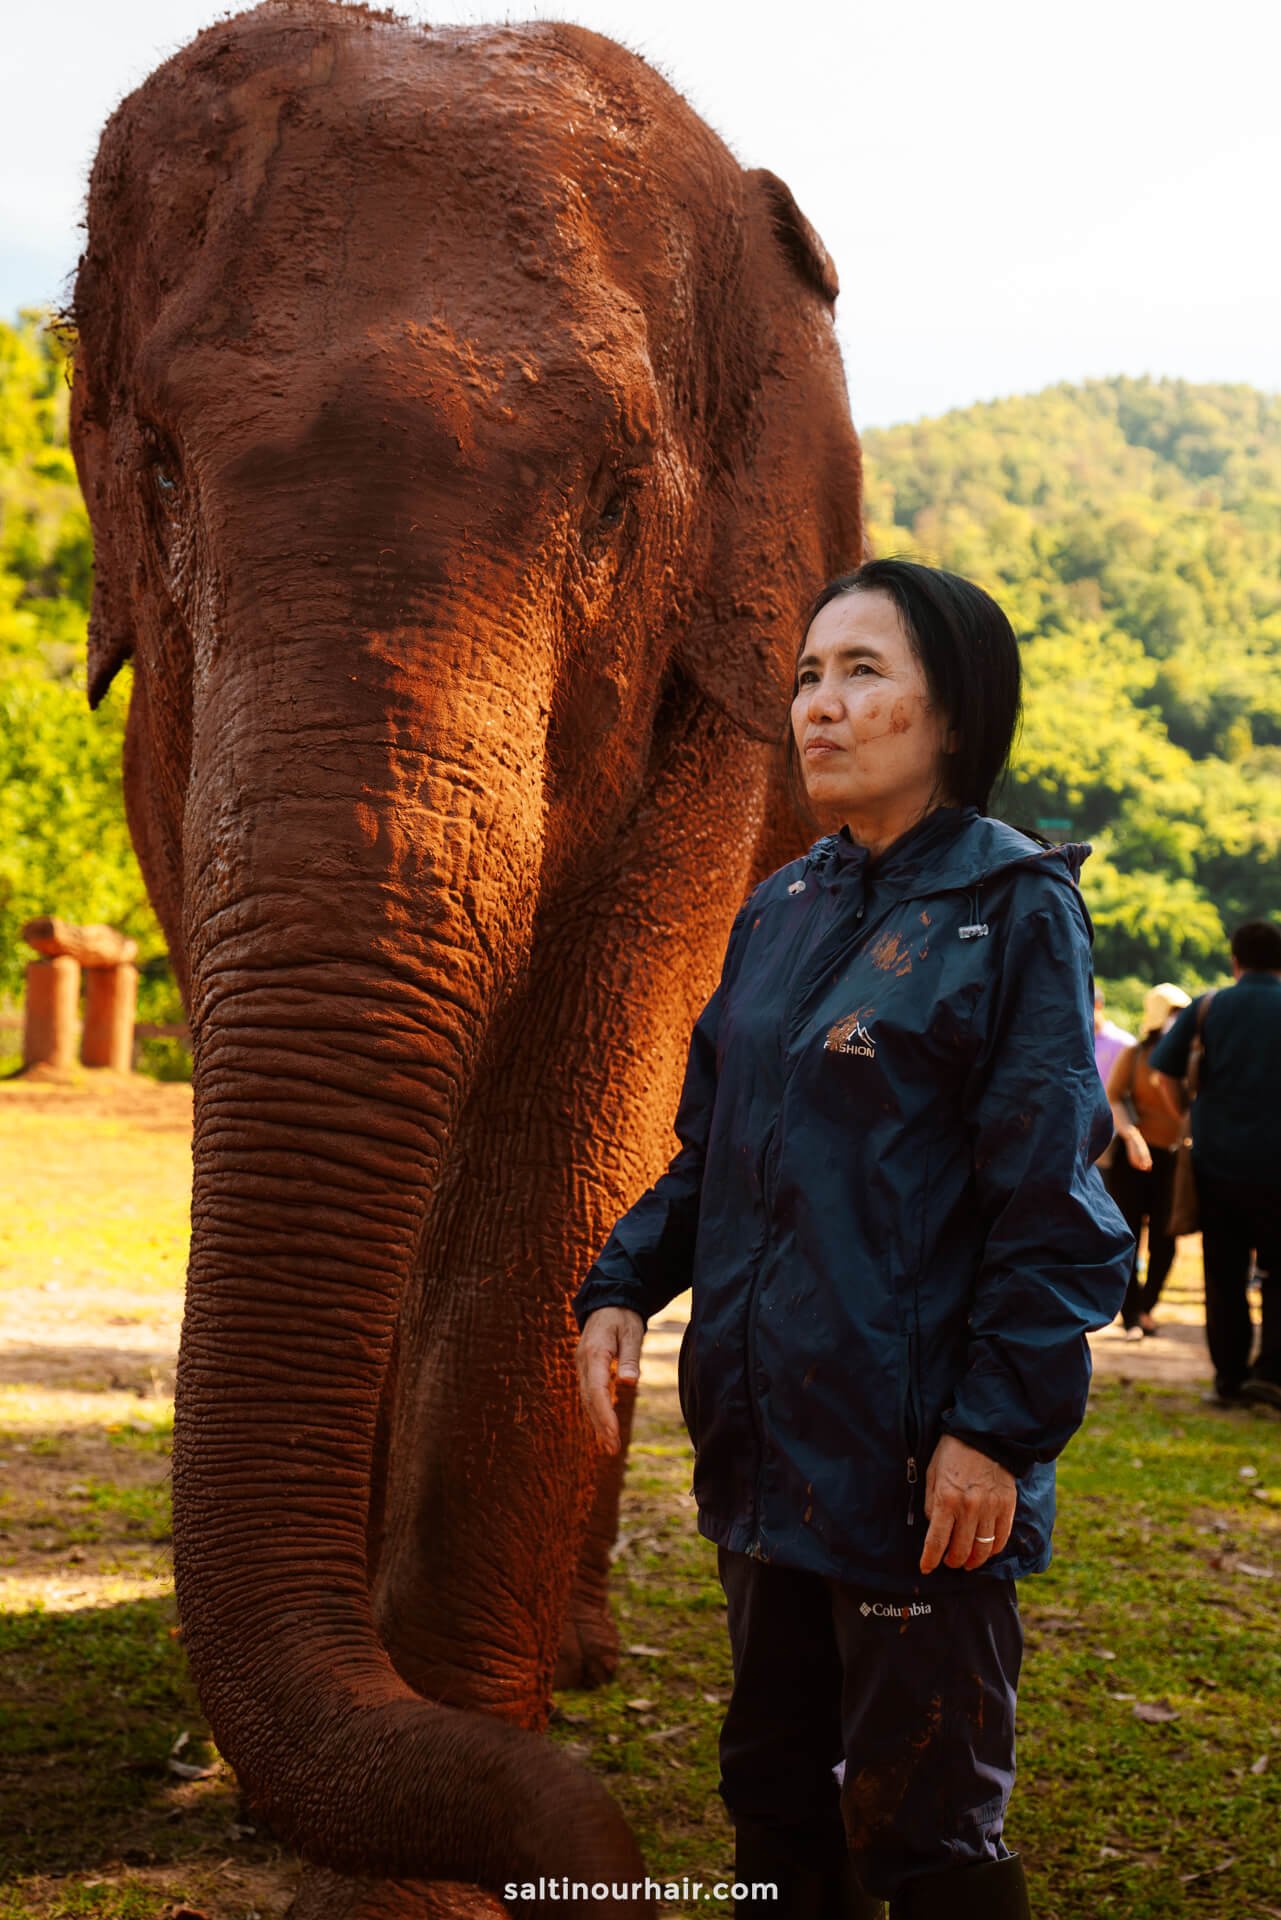 Elephant rescue and protection thailand Chiang Mai